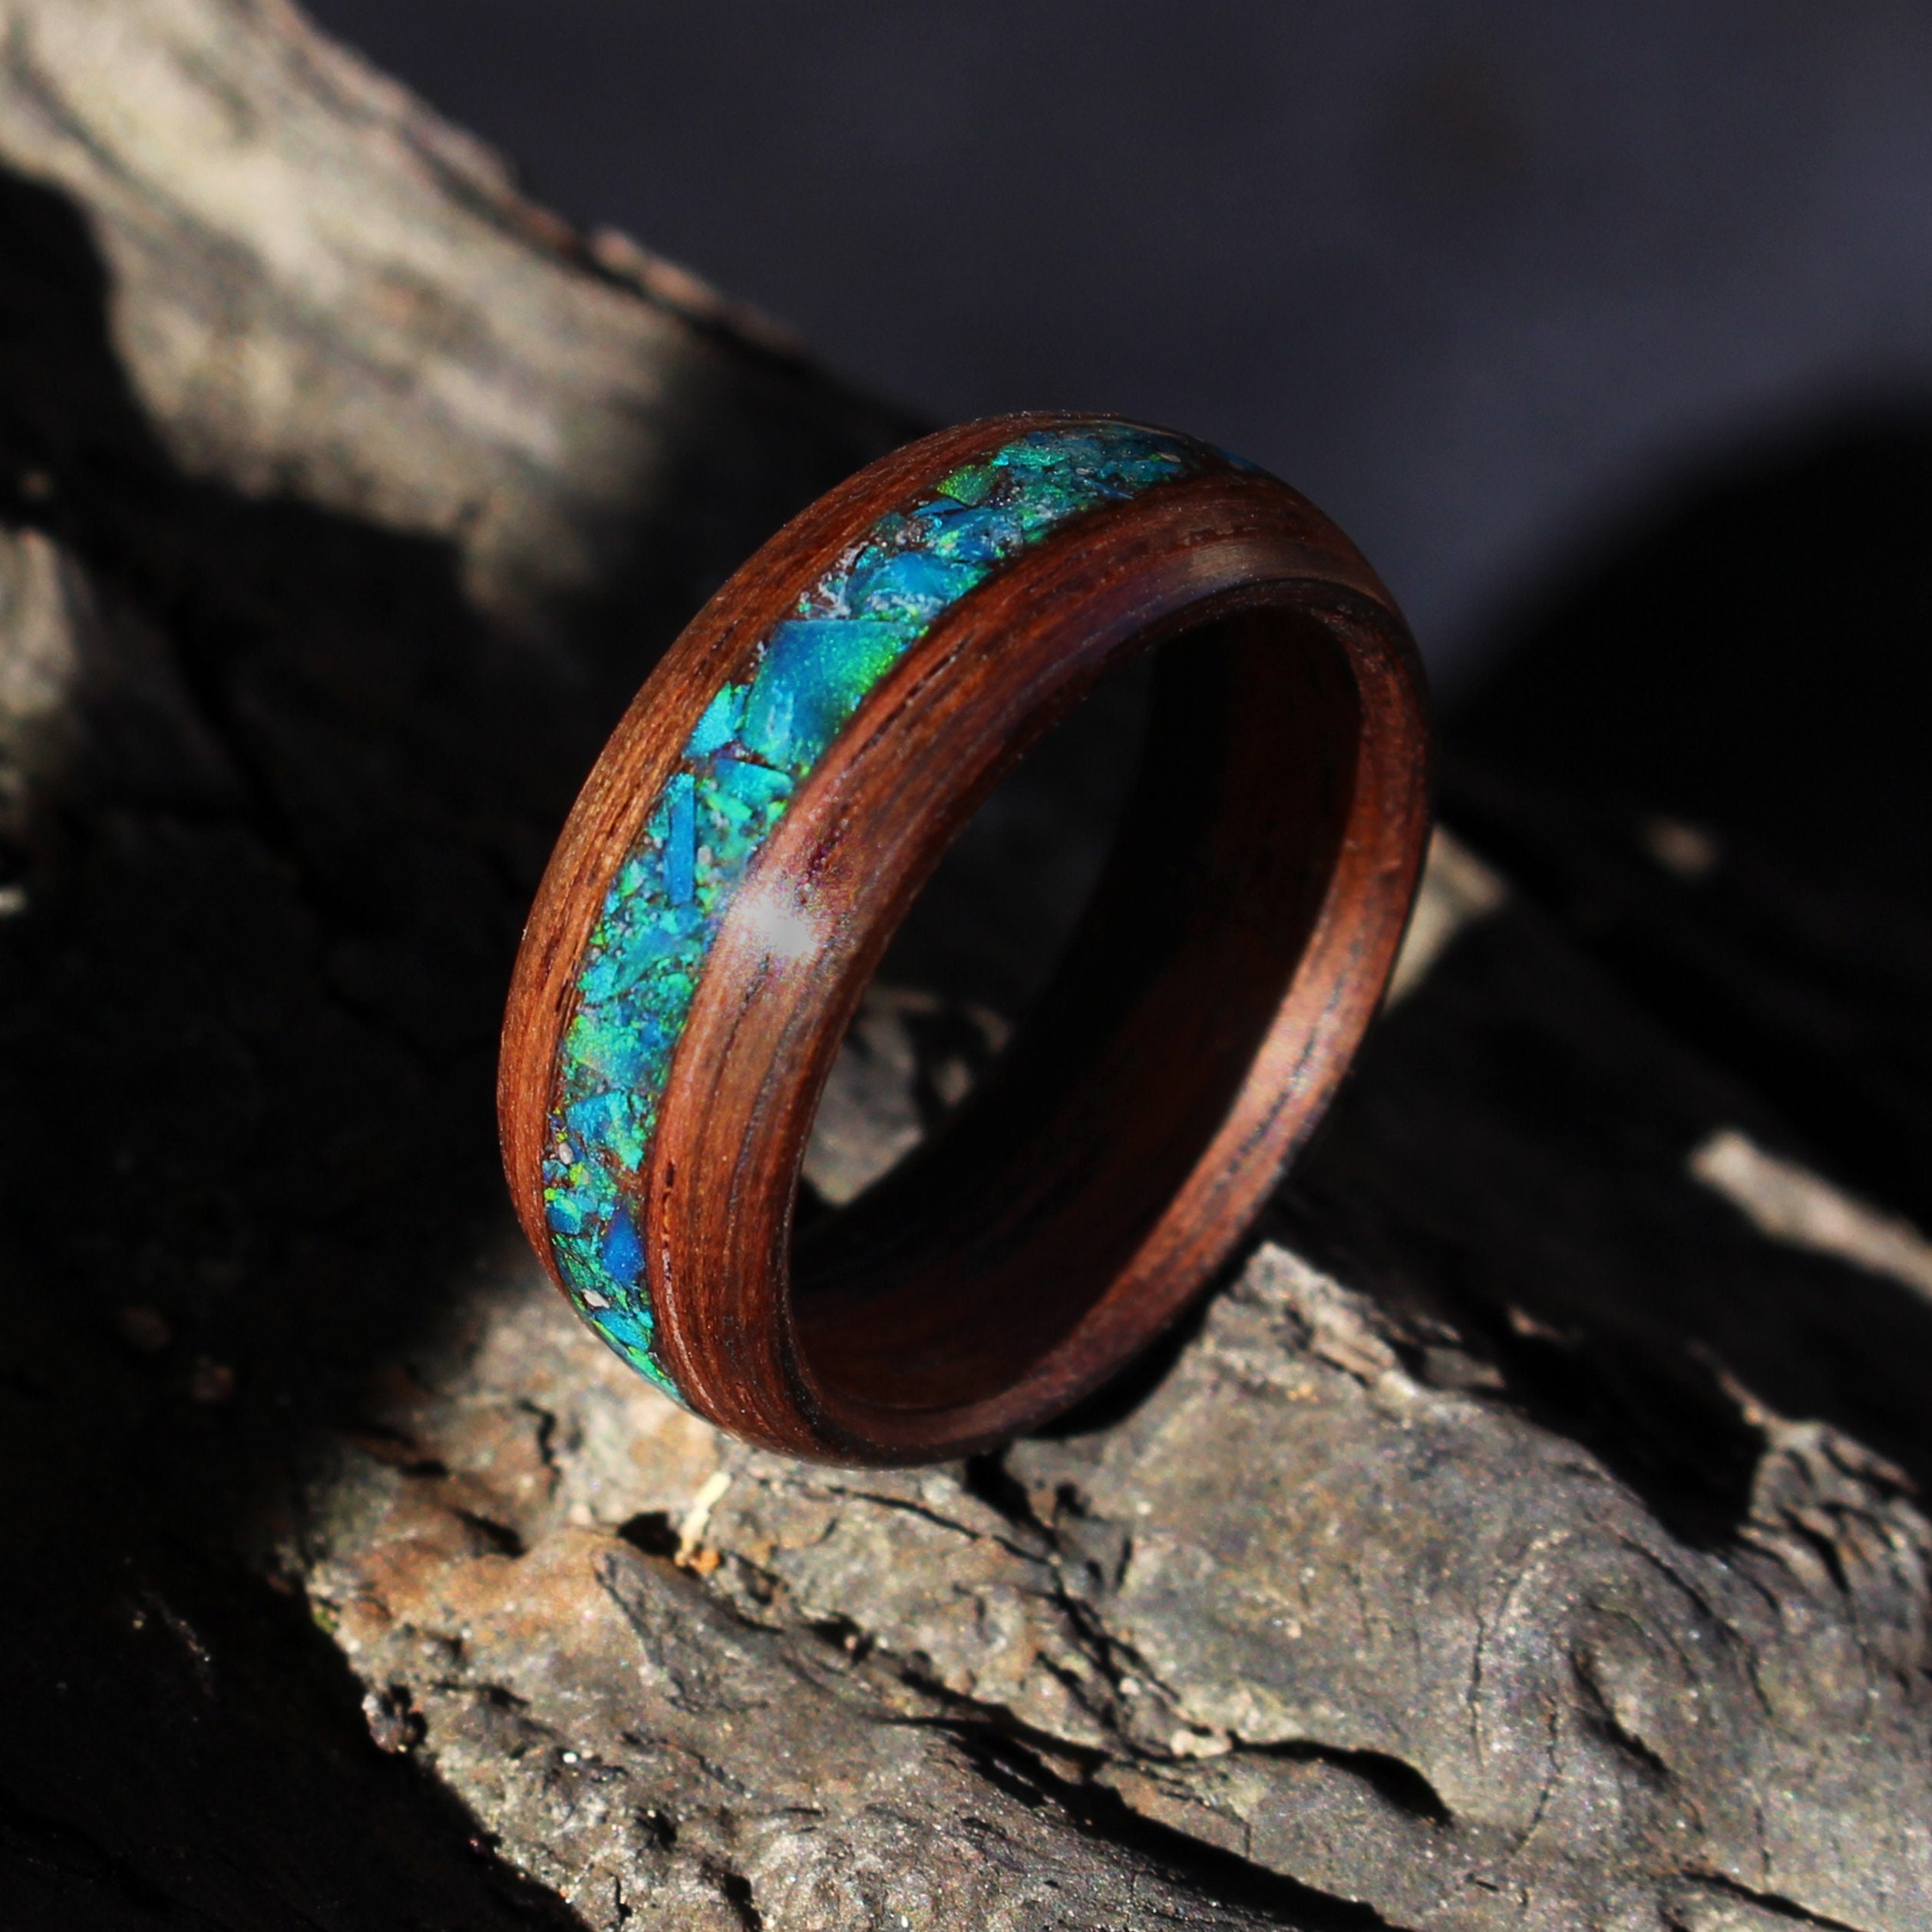 Bentwood Ring, Prism Rosewood Wooden Ring with Ethiopian Fire Opal -  Bentwood Jewelry Designs - Custom Handcrafted Bentwood Wood Rings